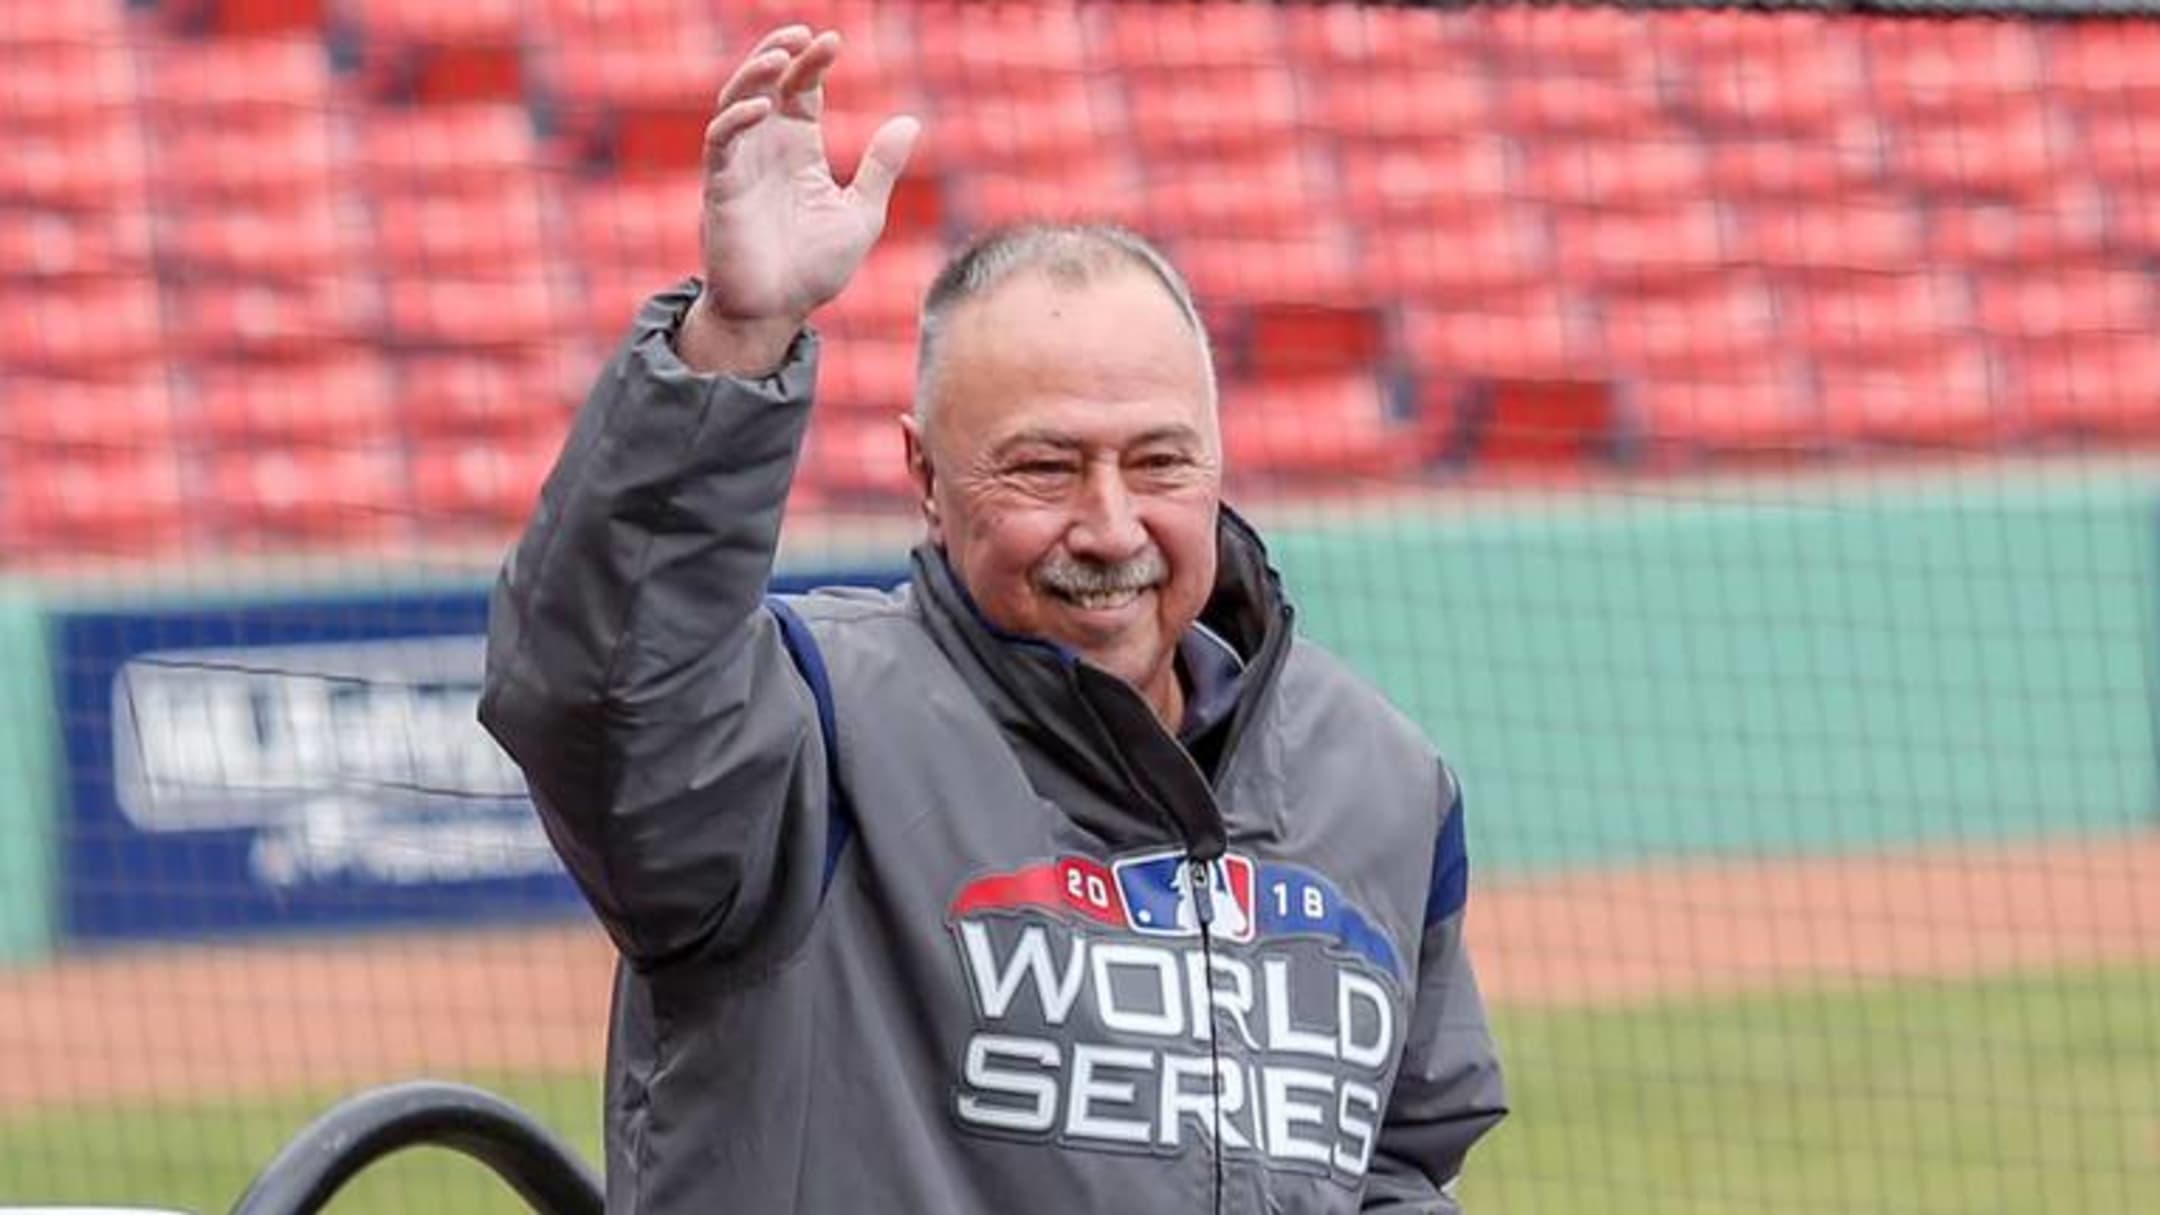 Rest in peace to Jerry Remy who has passed away at the age of 68